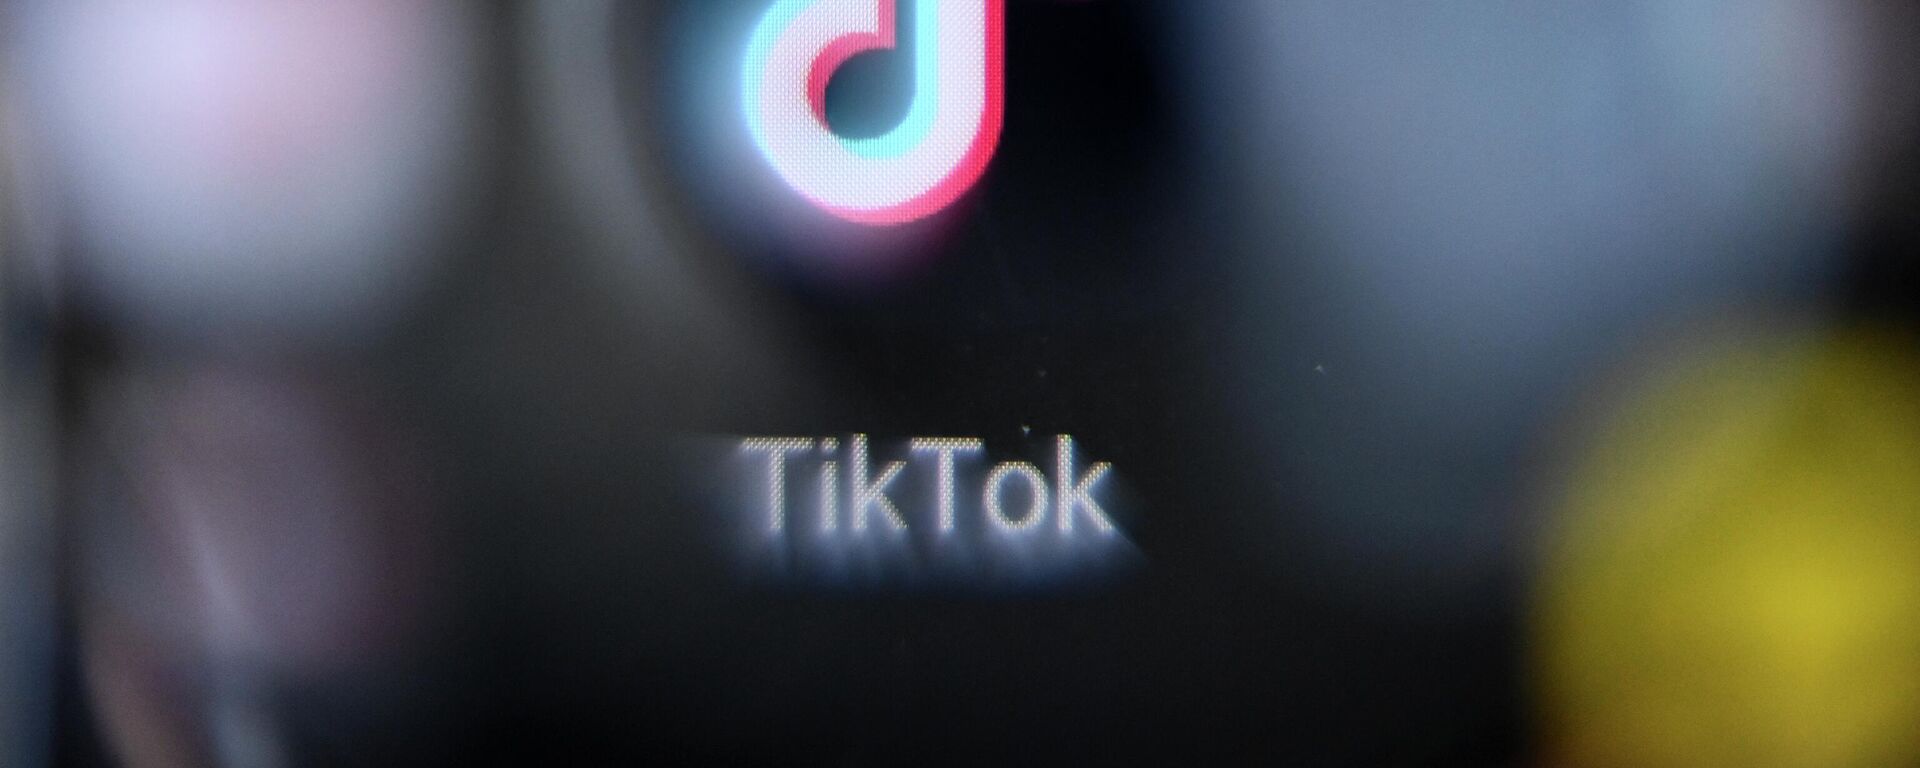 This picture taken in Moscow on October 12, 2021 shows the Chinese social networking service TikTok's logo on a smartphone screen. - Sputnik International, 1920, 02.07.2022